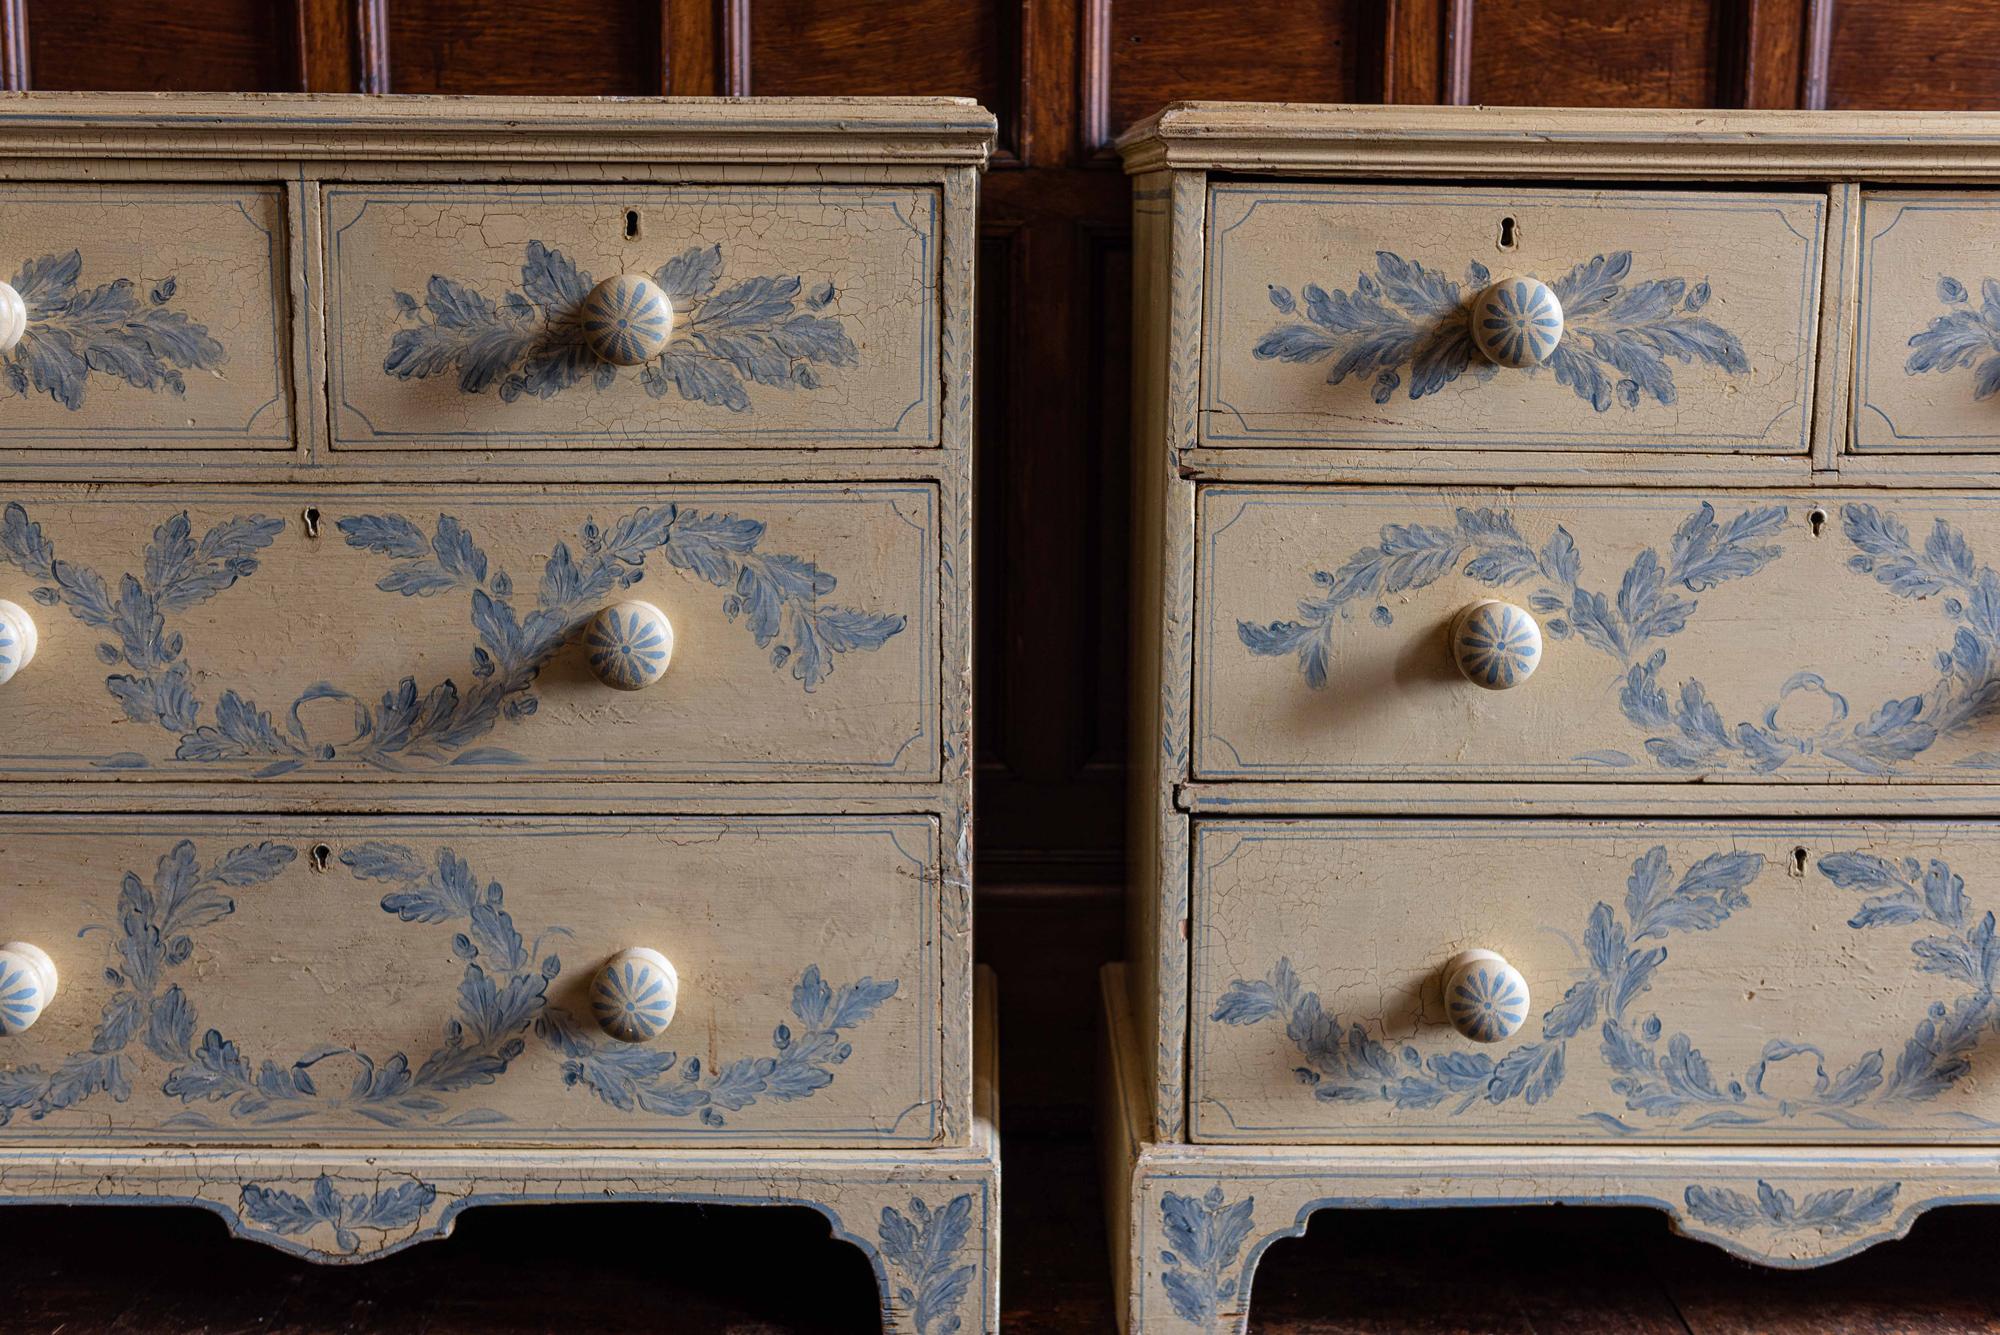 19th Century English Pair of Painted Chest of Drawers
Matching pair of country house painted chests of drawers in original paint.
Later knobs, circa 1840.

Price is for the pair.

Measures: 81 W x 46 D x 78 H cm.

    